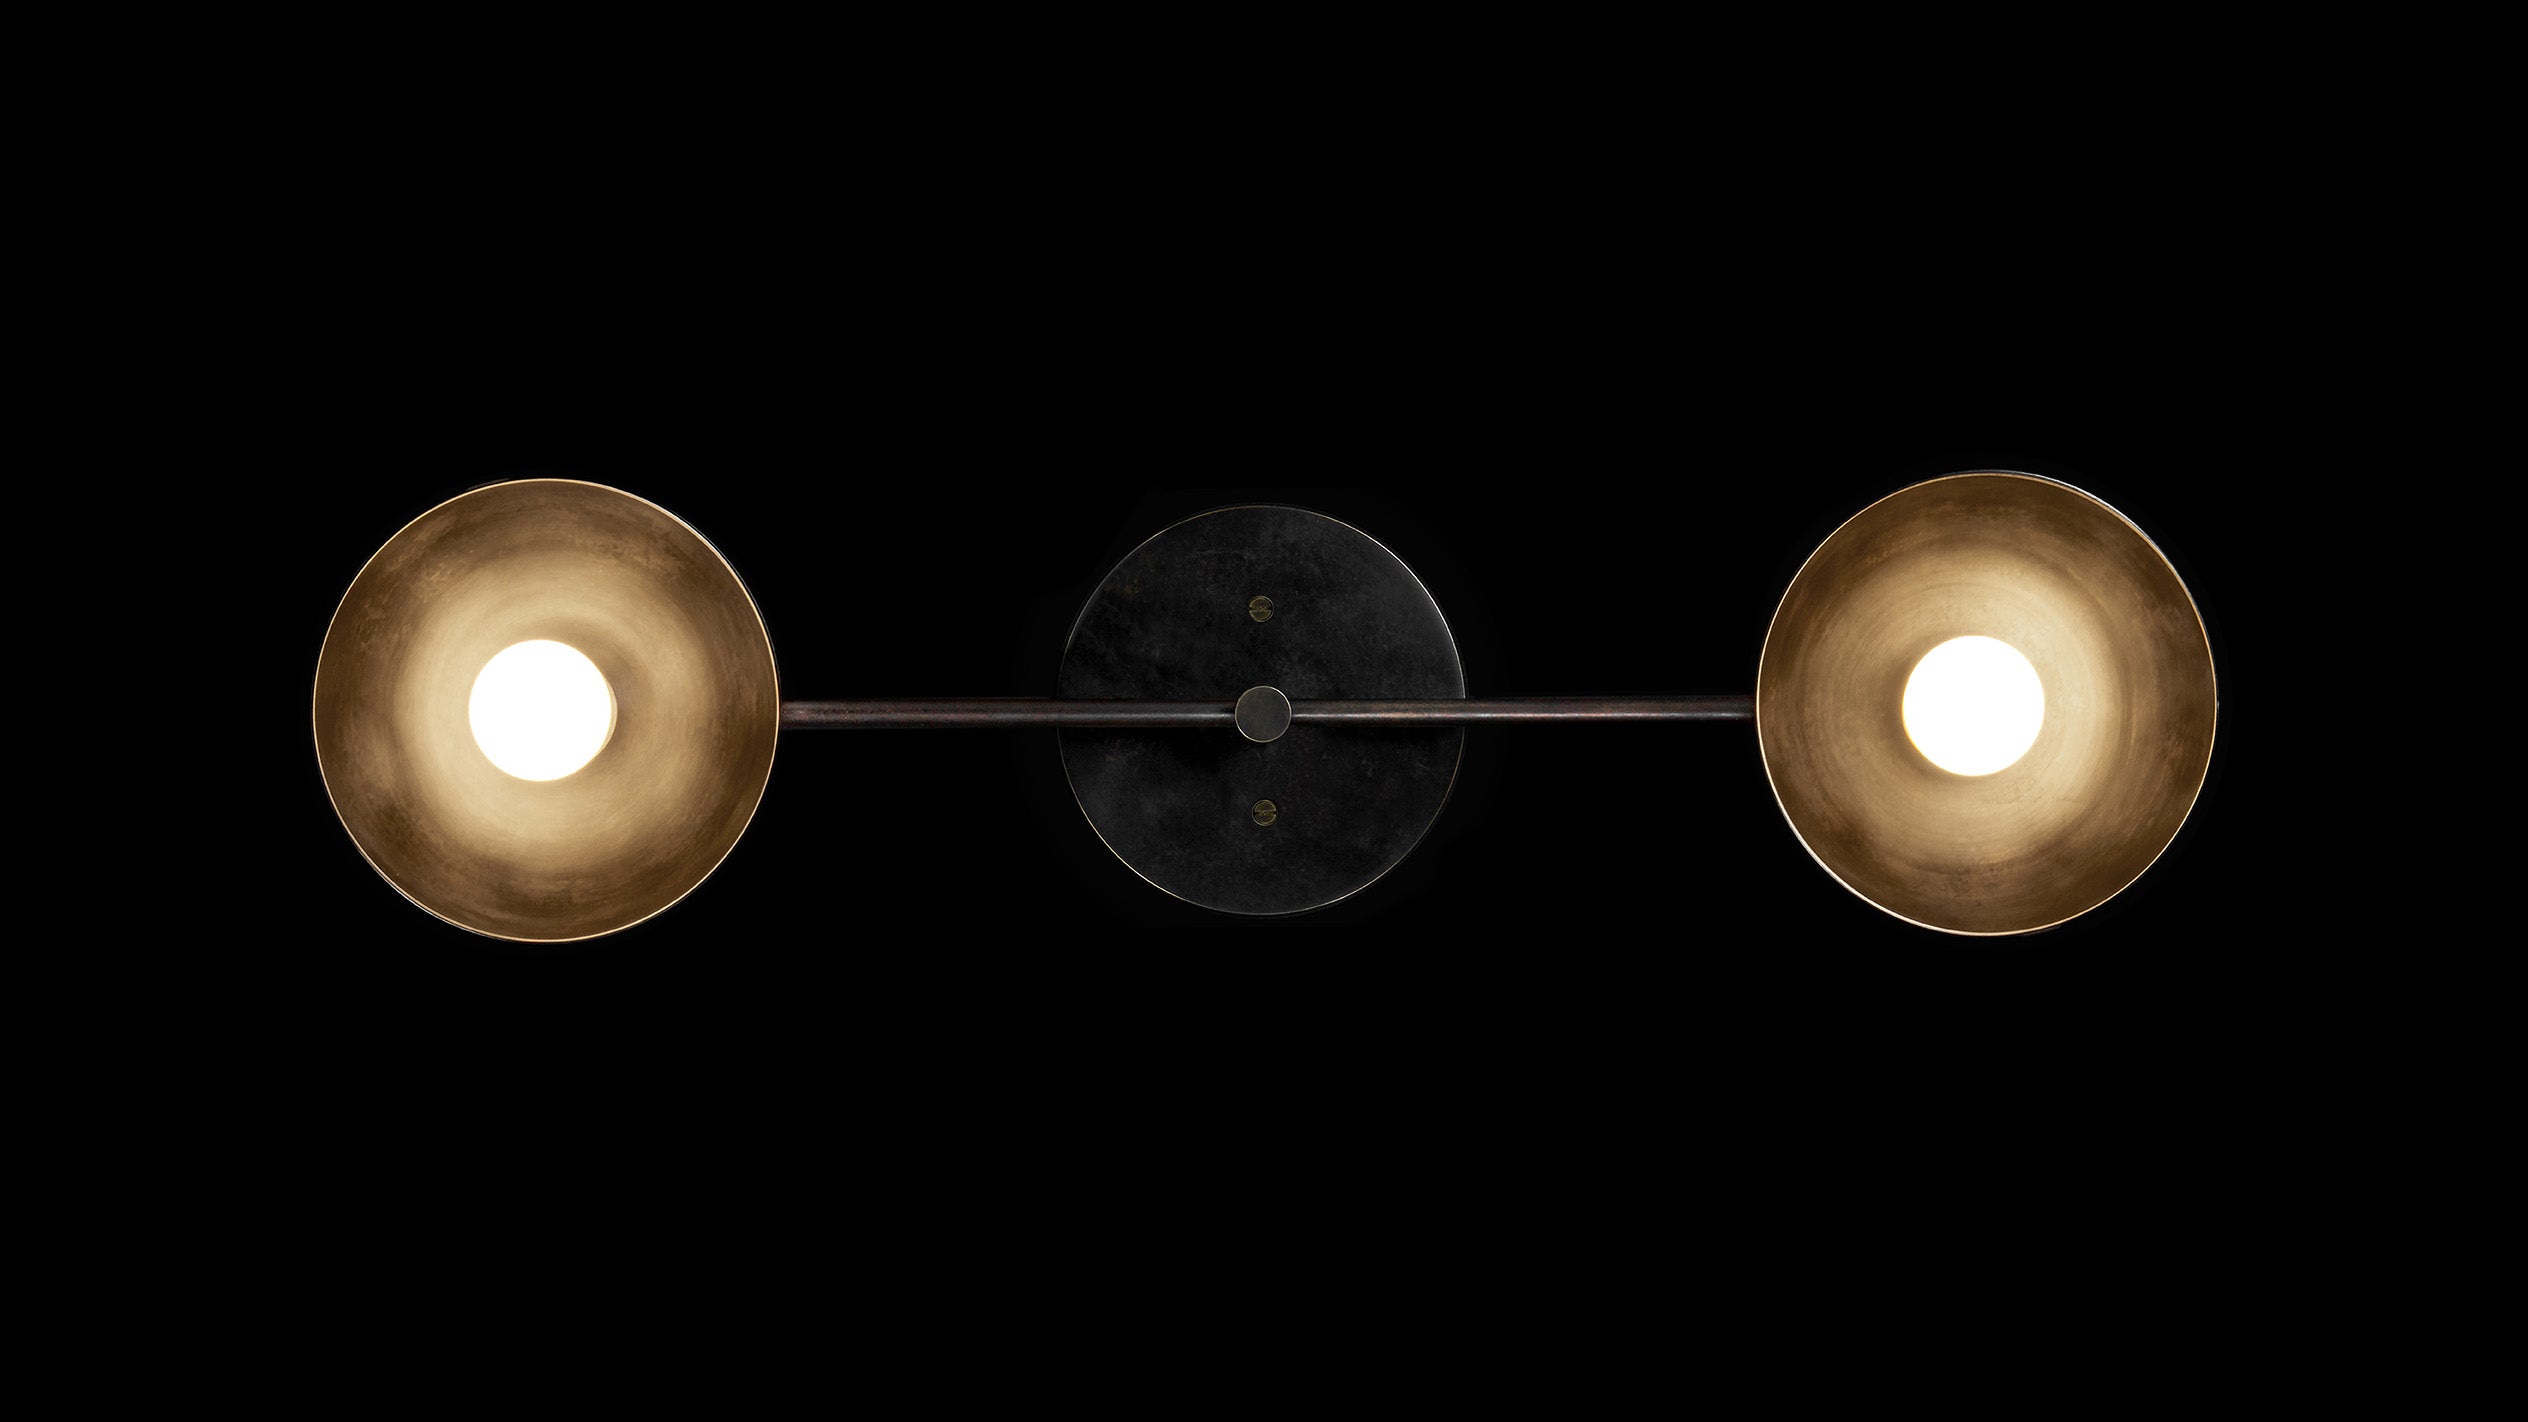 TRAPEZE : 2 surface light in Blackened Brass with Aged Brass bowls, mounted horizontally on a black wall. 